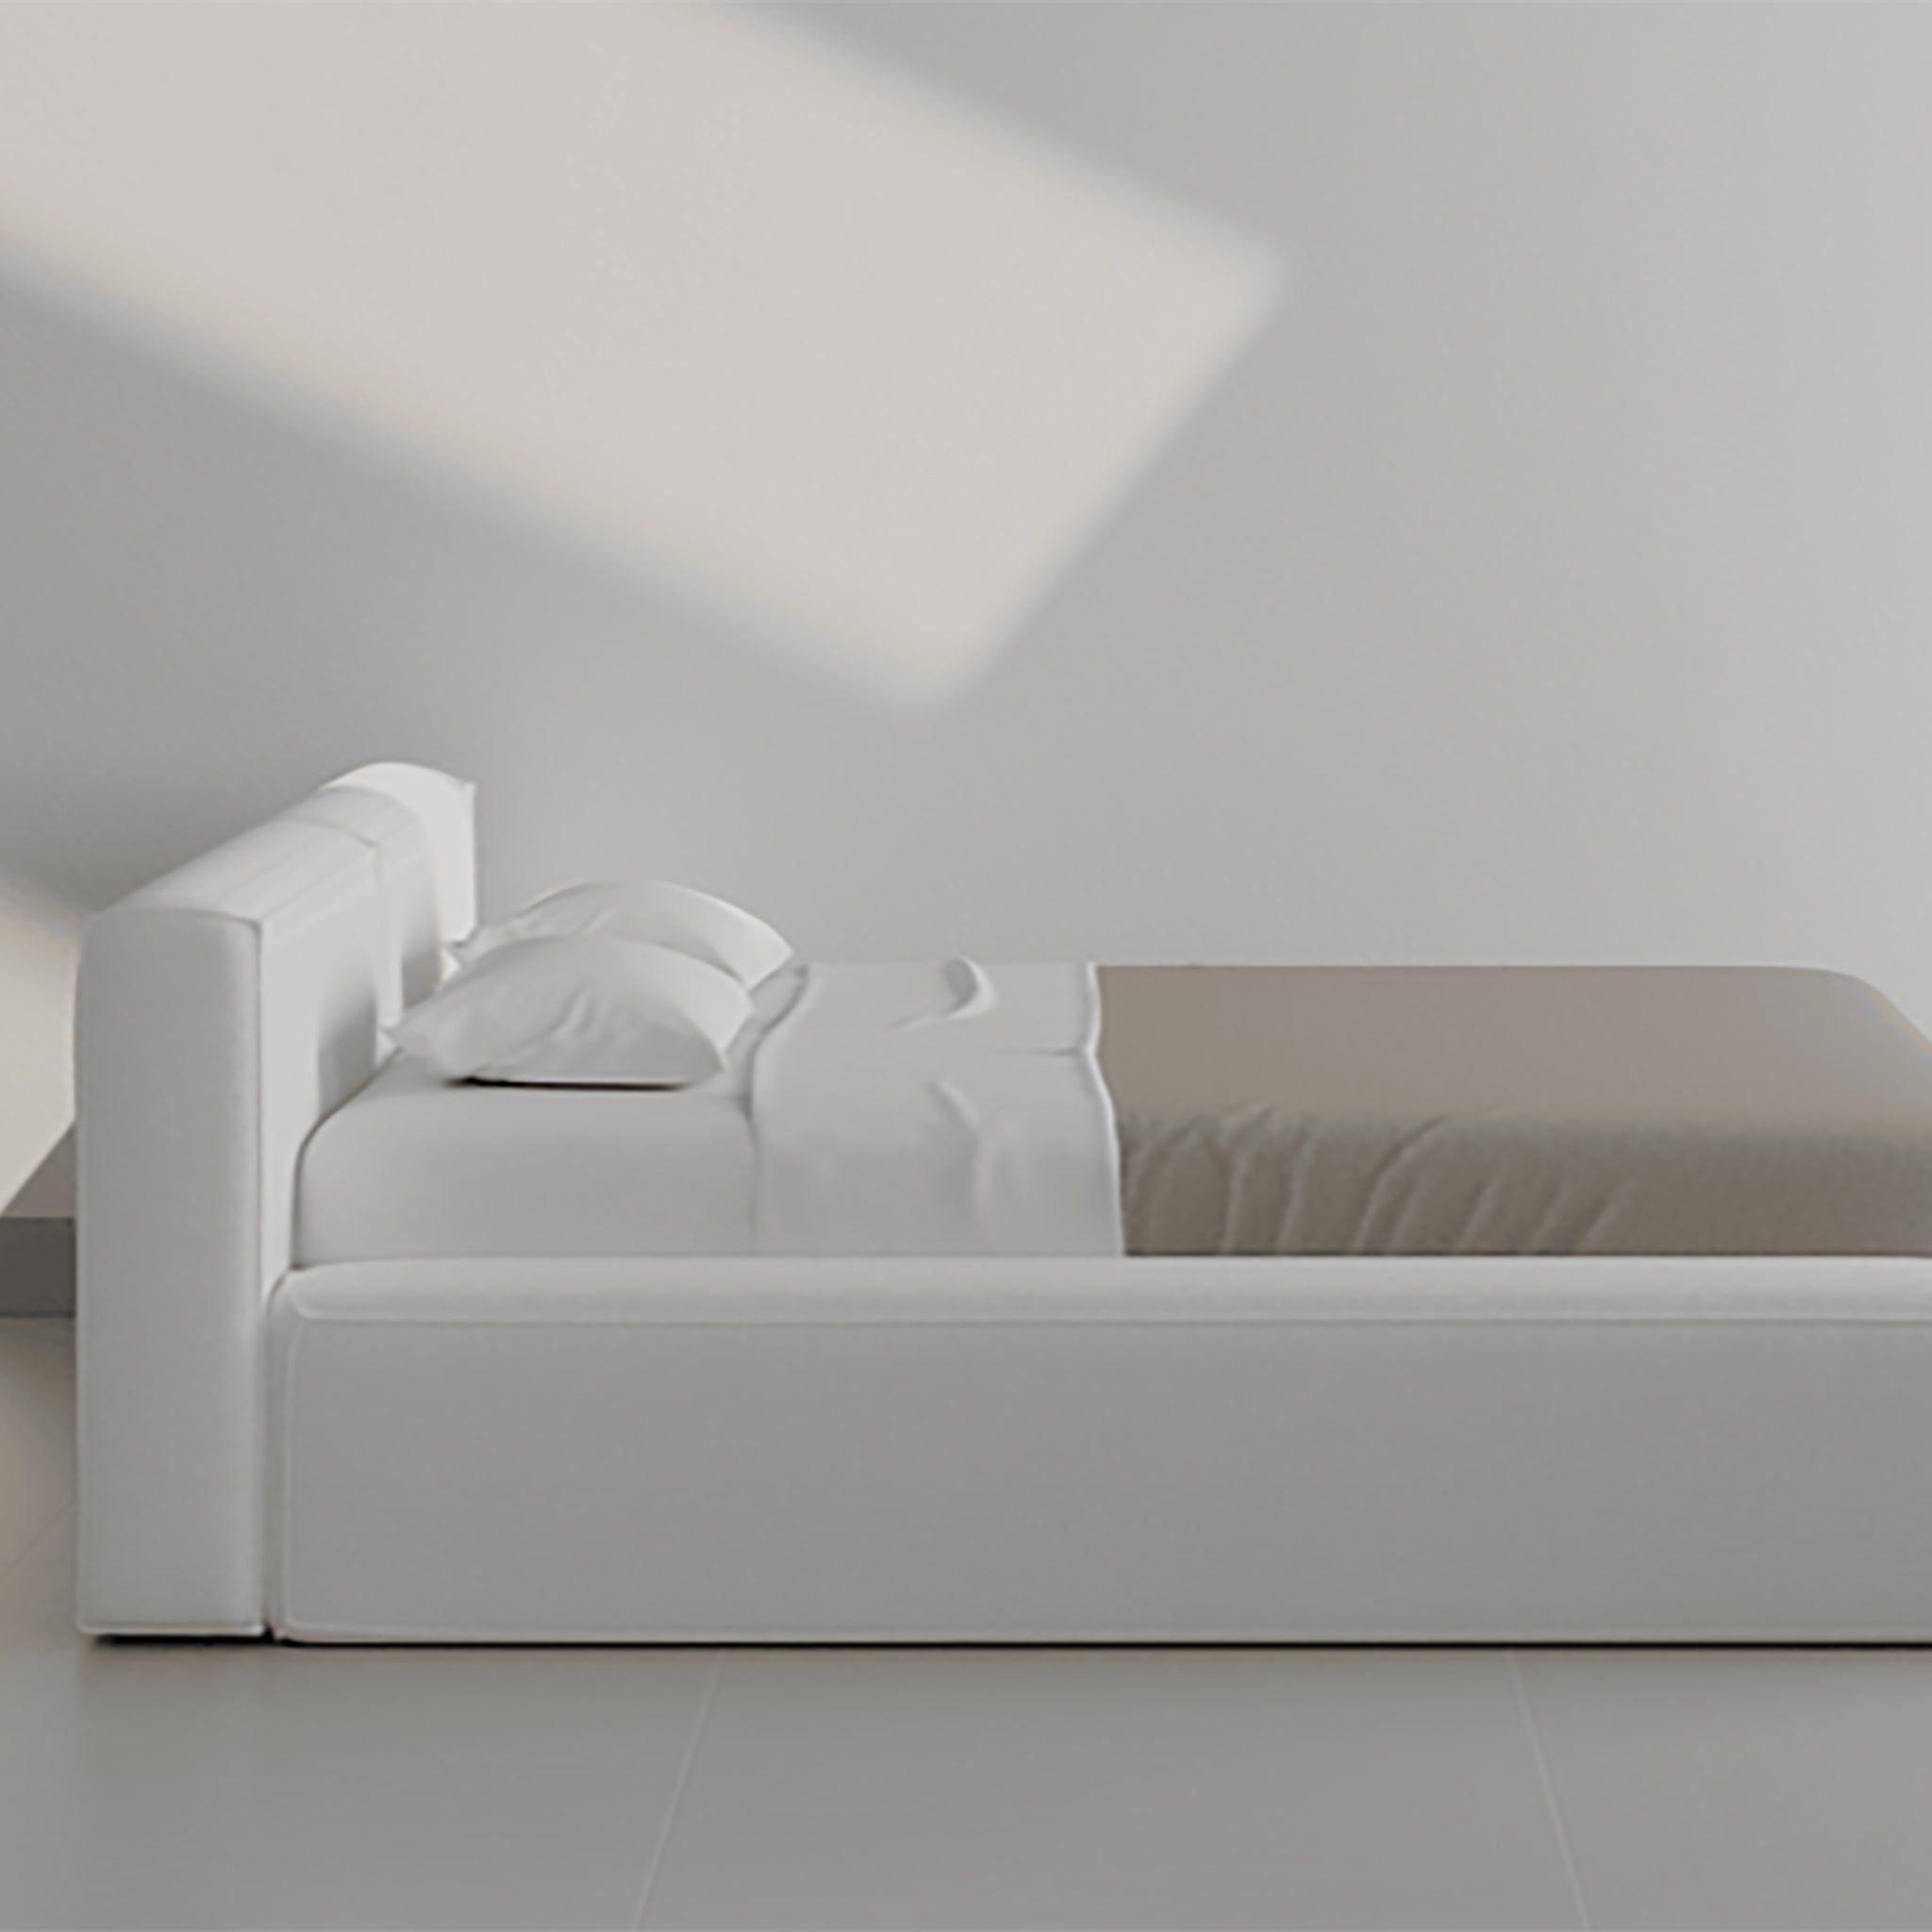 Compact Derrel bed in a relaxed style. Perfect for smaller bedrooms.